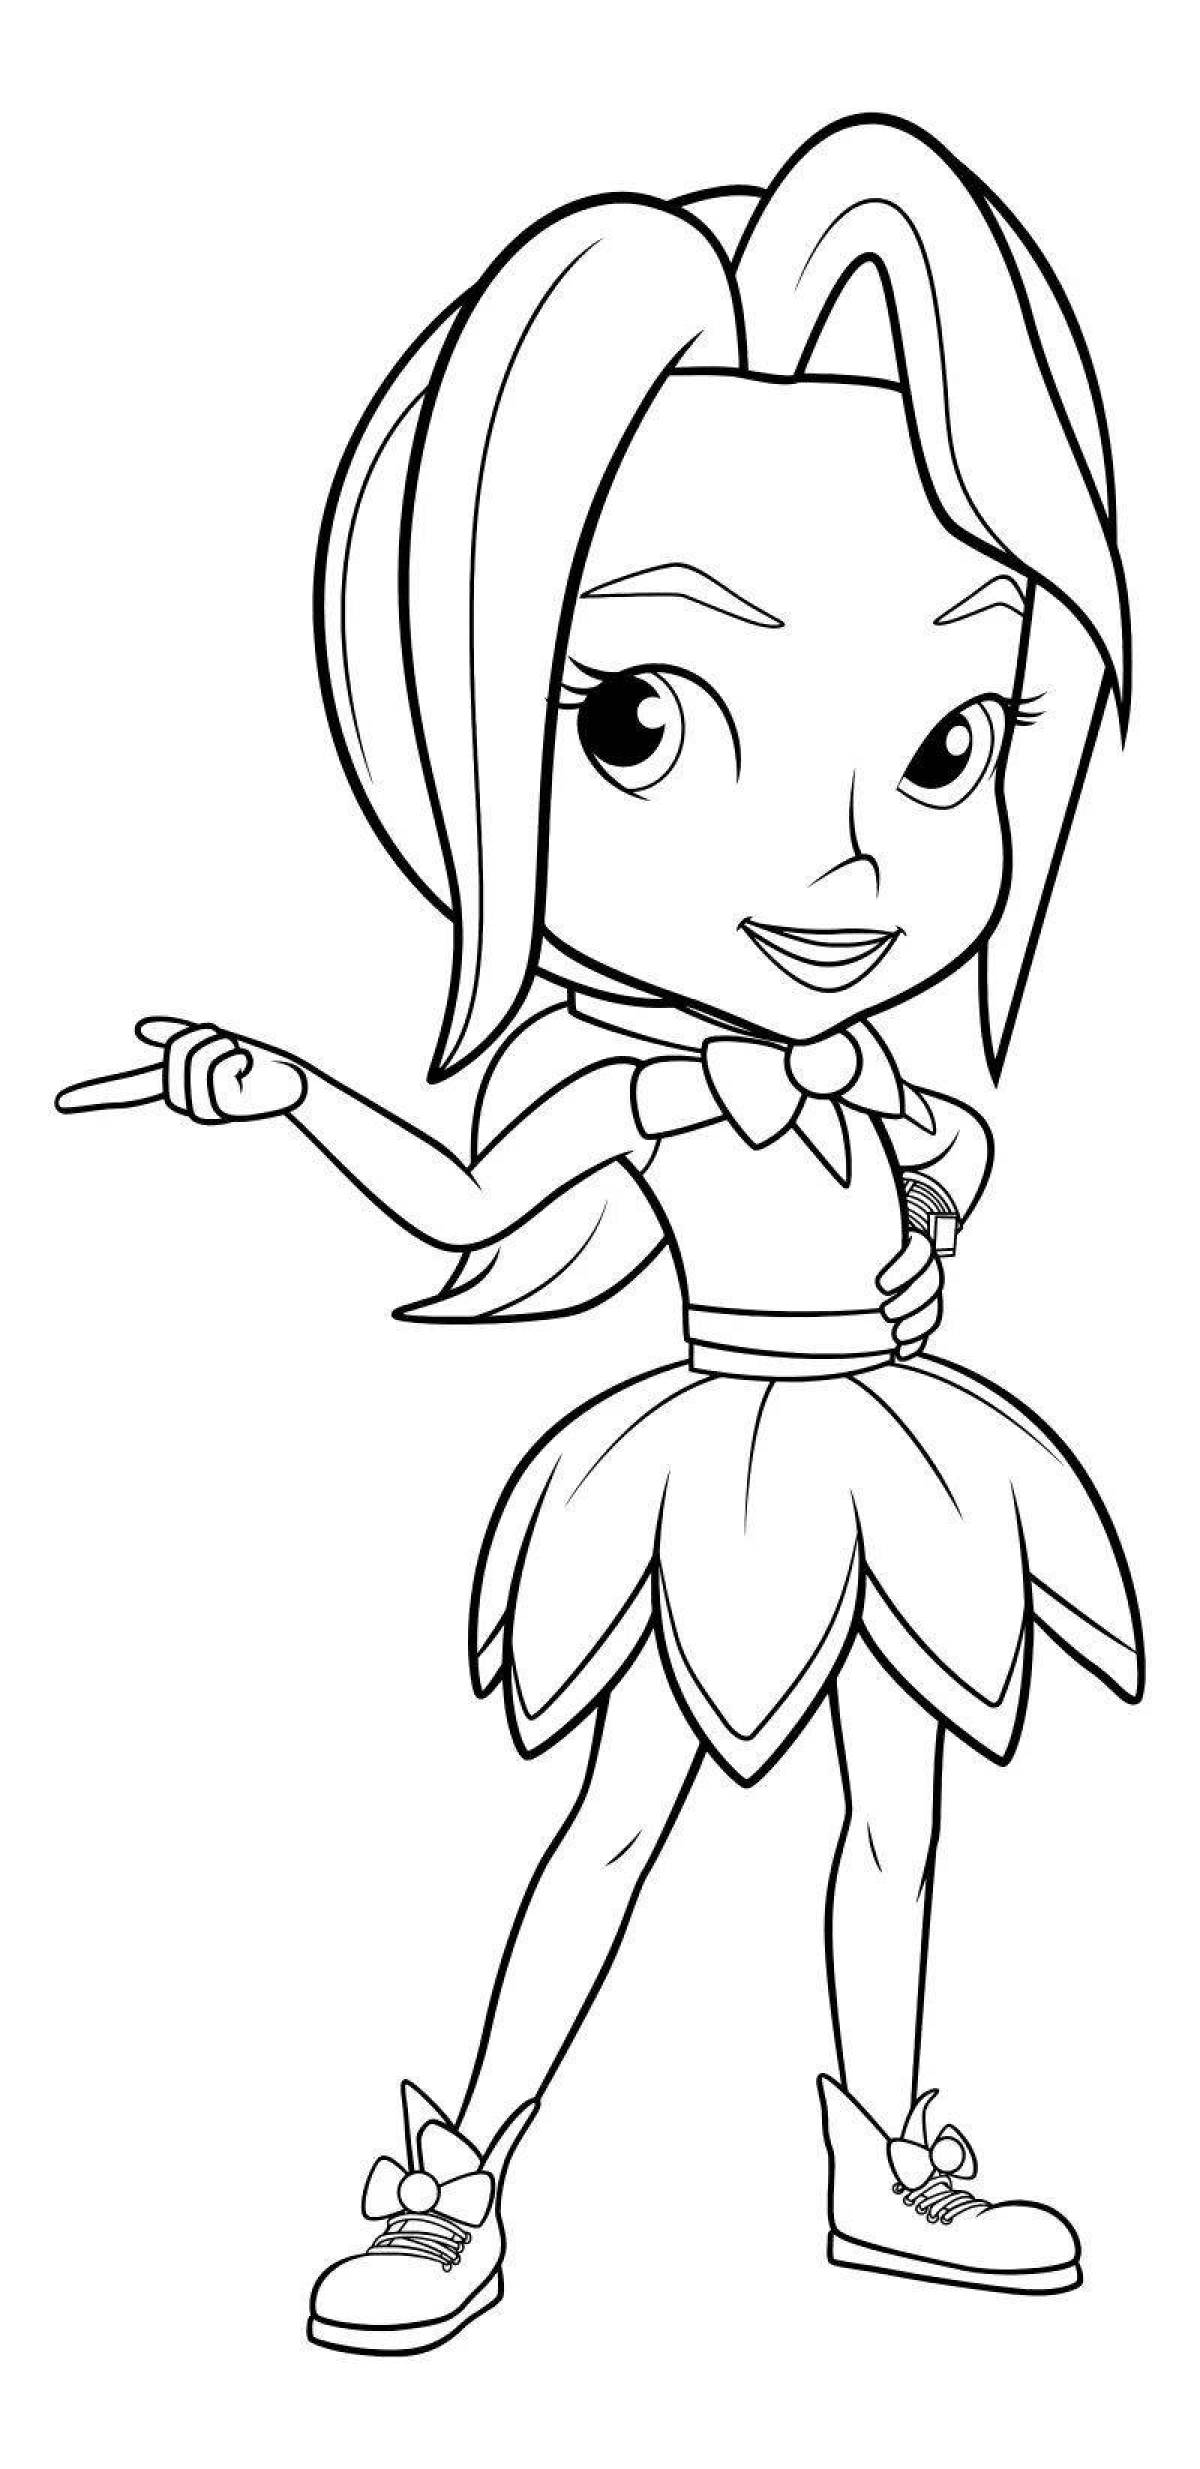 Fantastic fairy coloring pages for kids